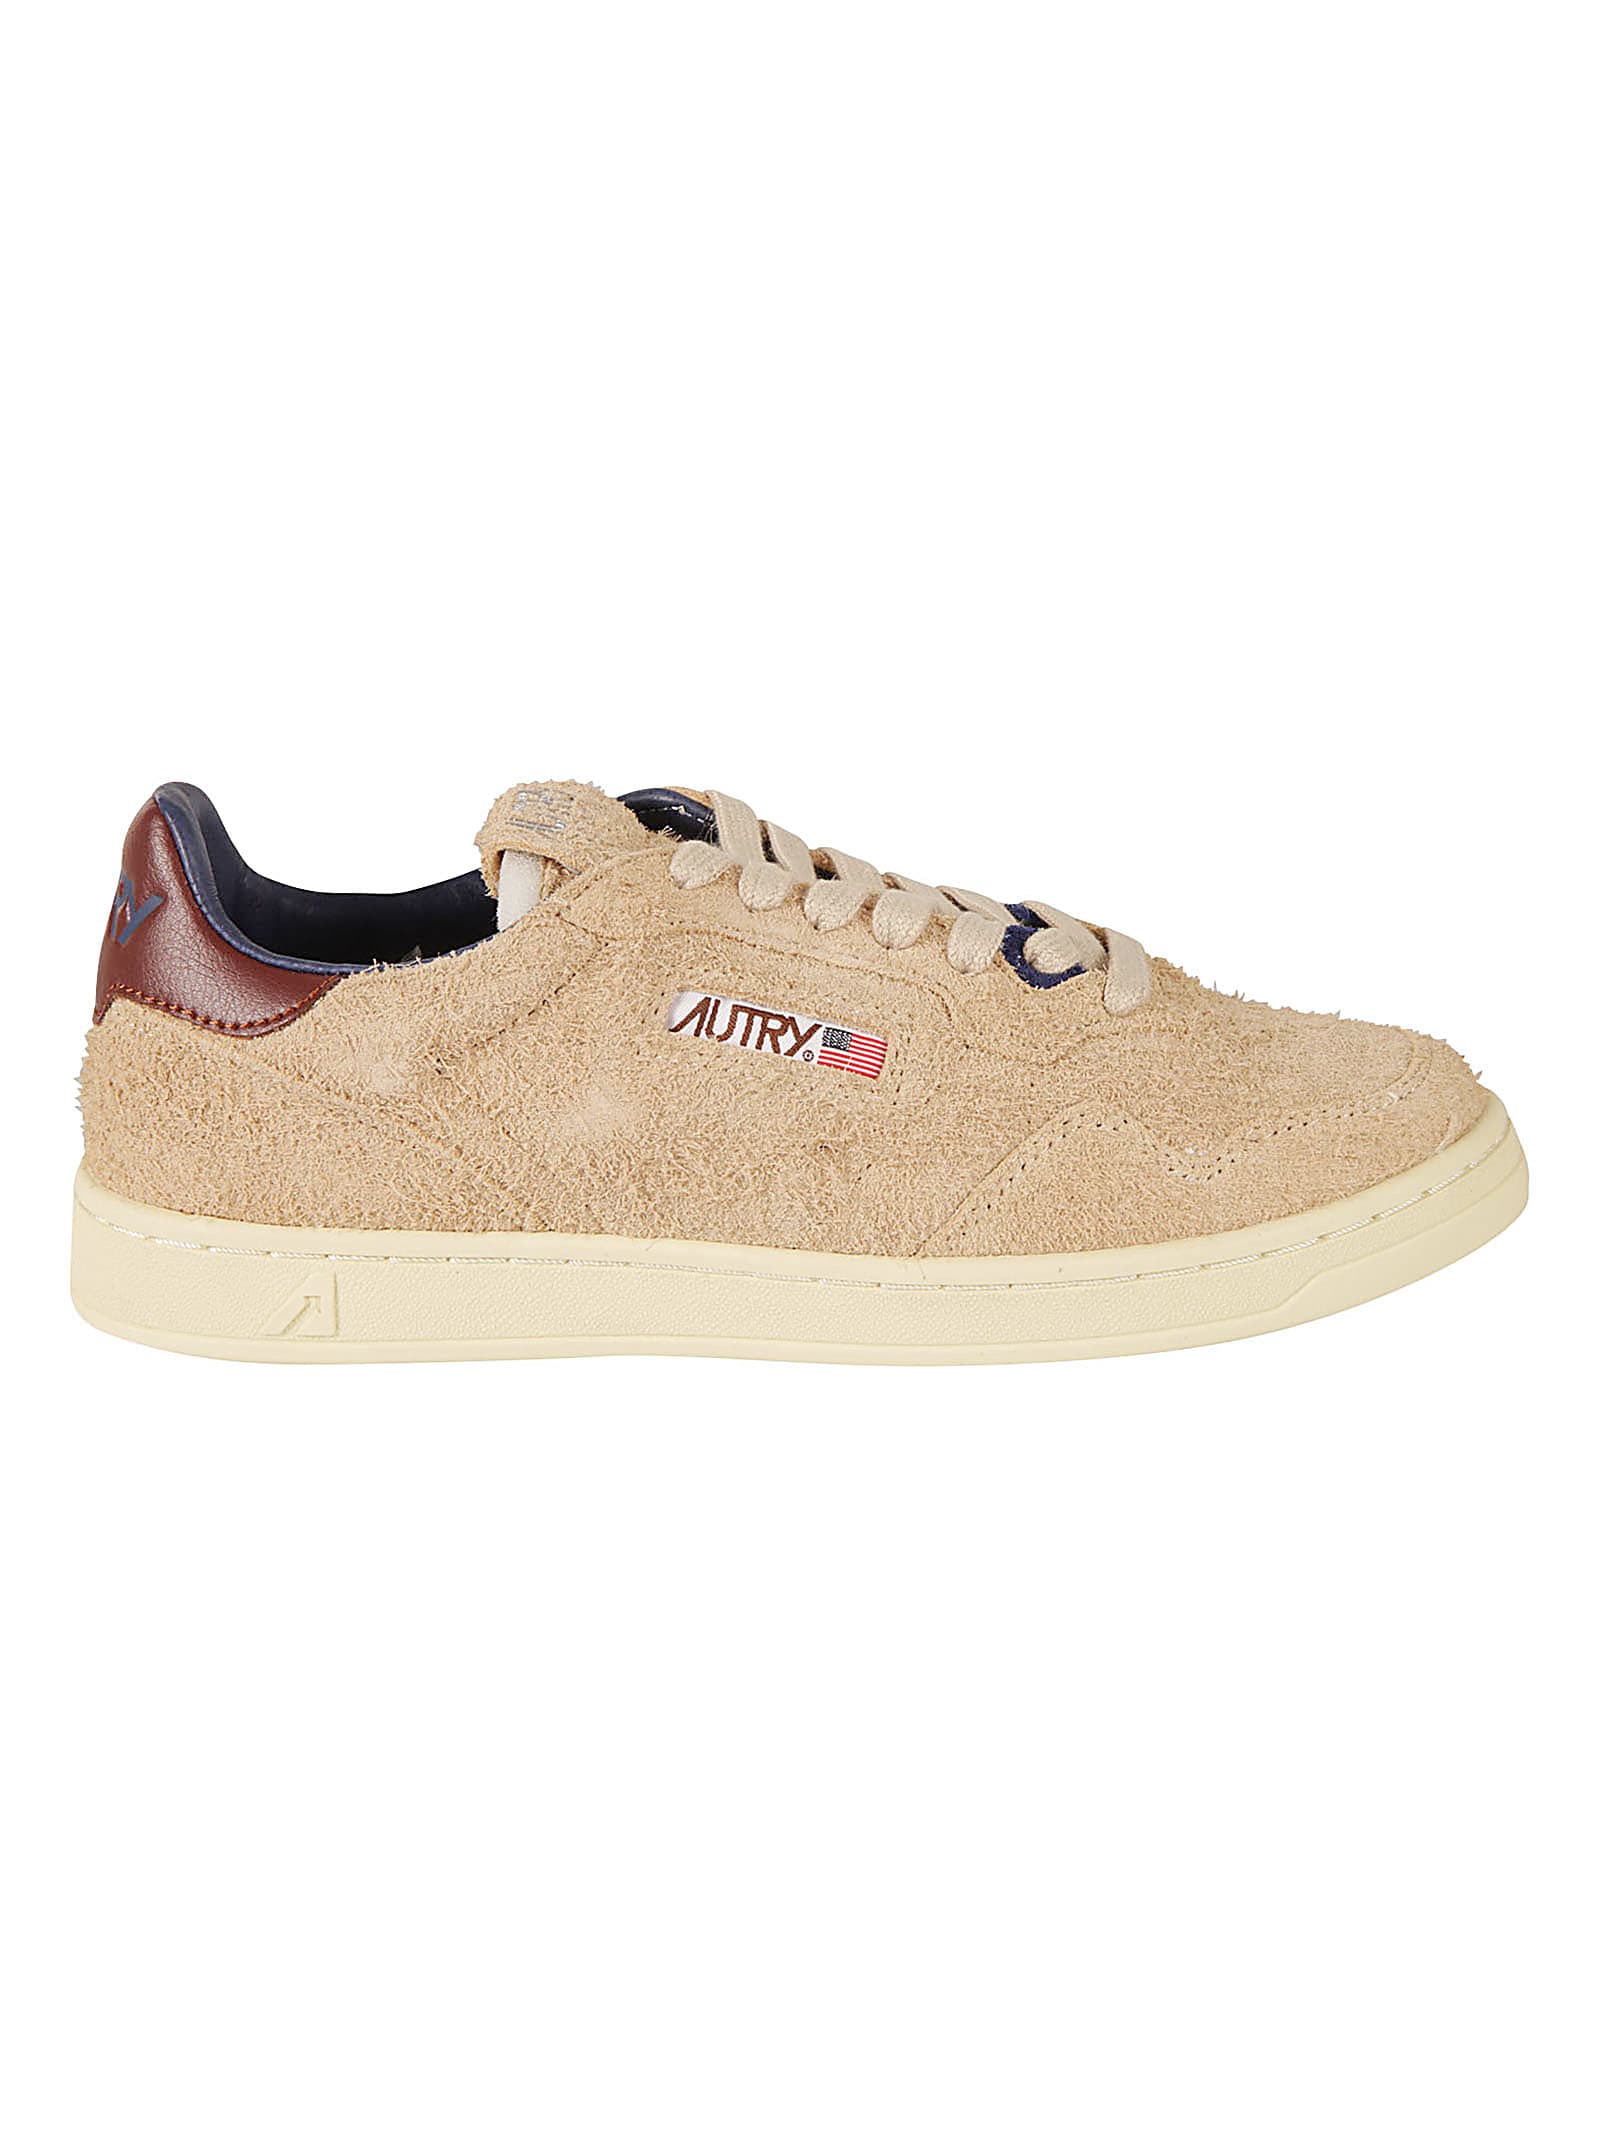 Autry Logo Patched Low Sneakers In Ecru/fudge